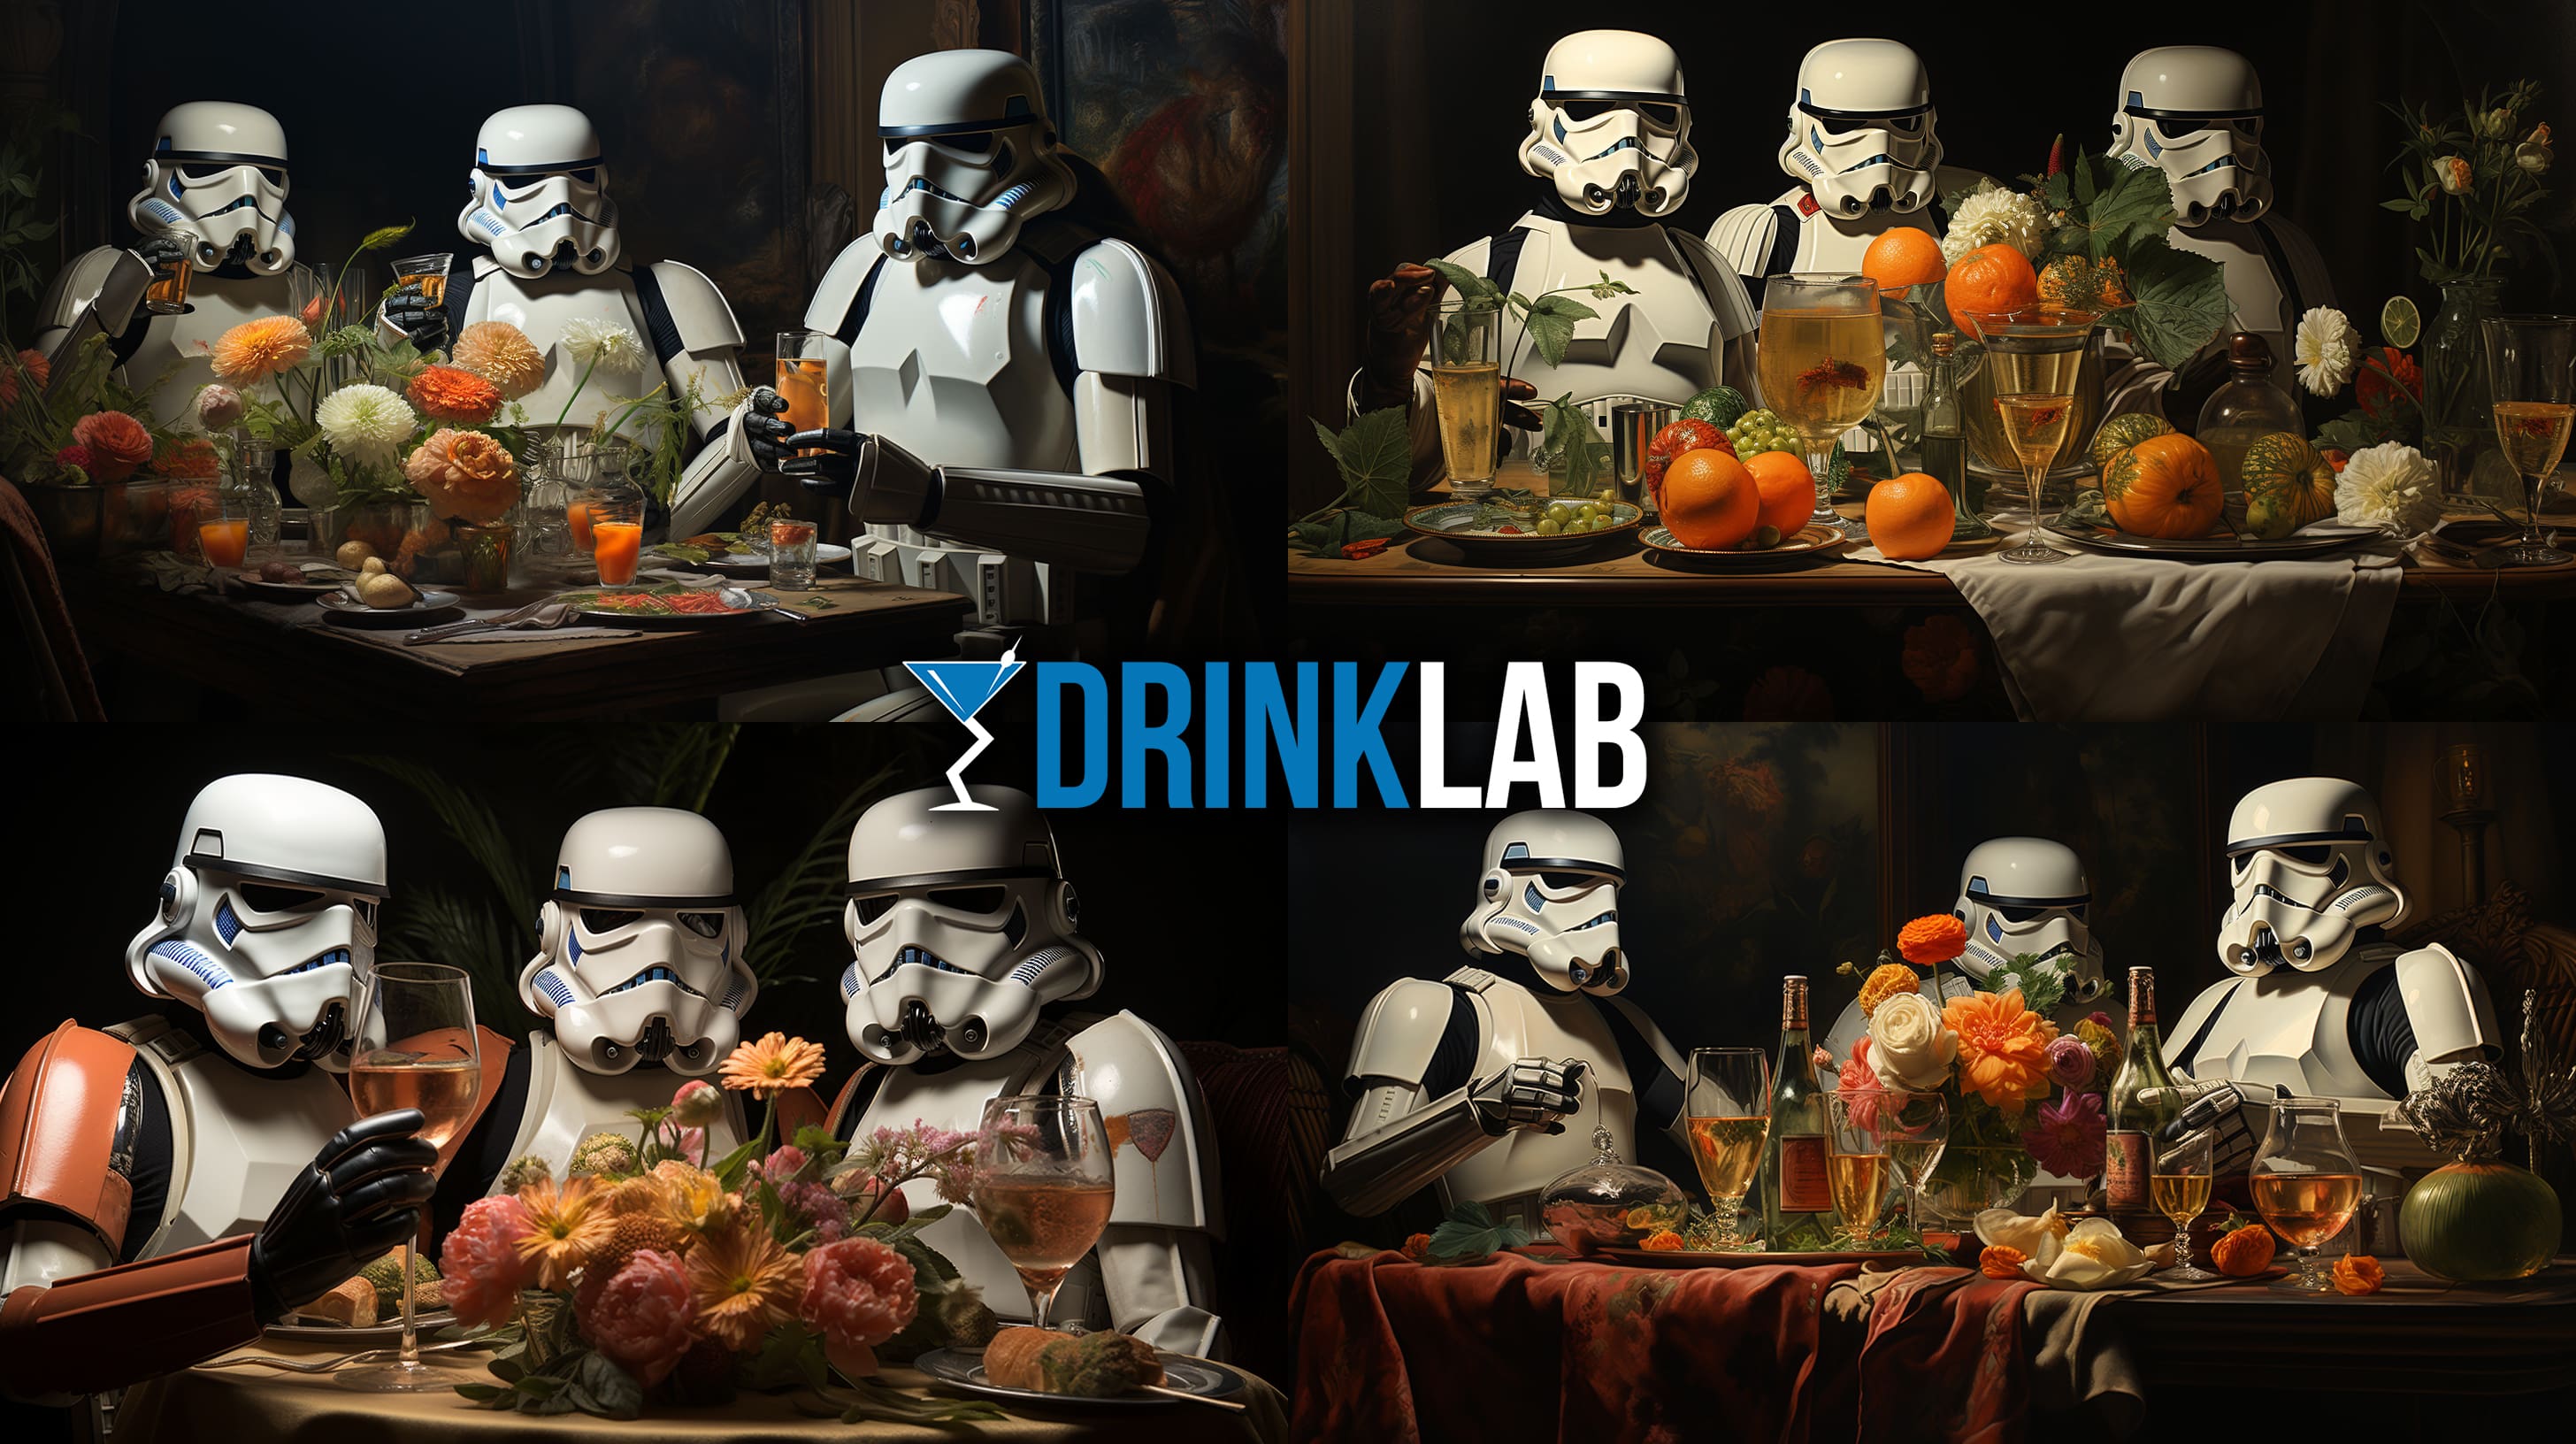 Star Wars Storm Trooper Cocktail party